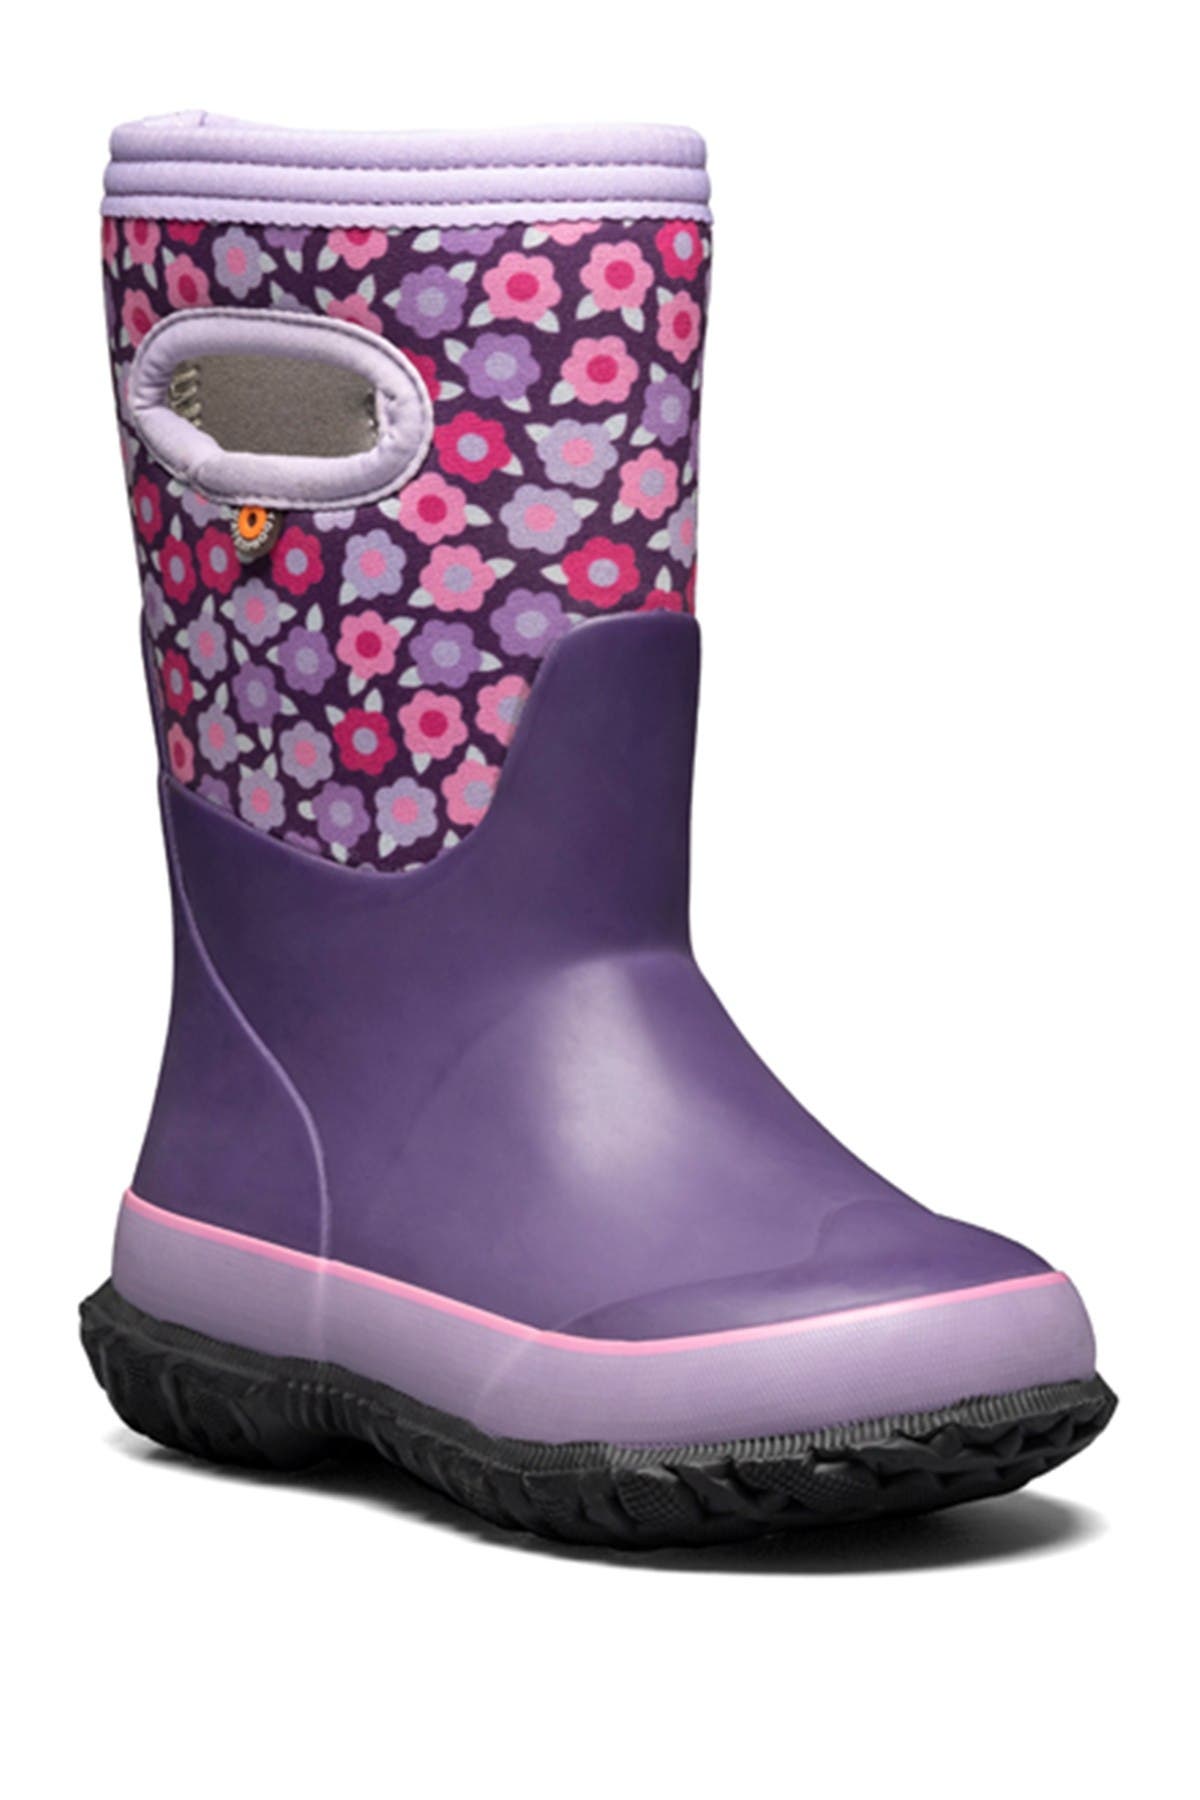 bogs boots for girls